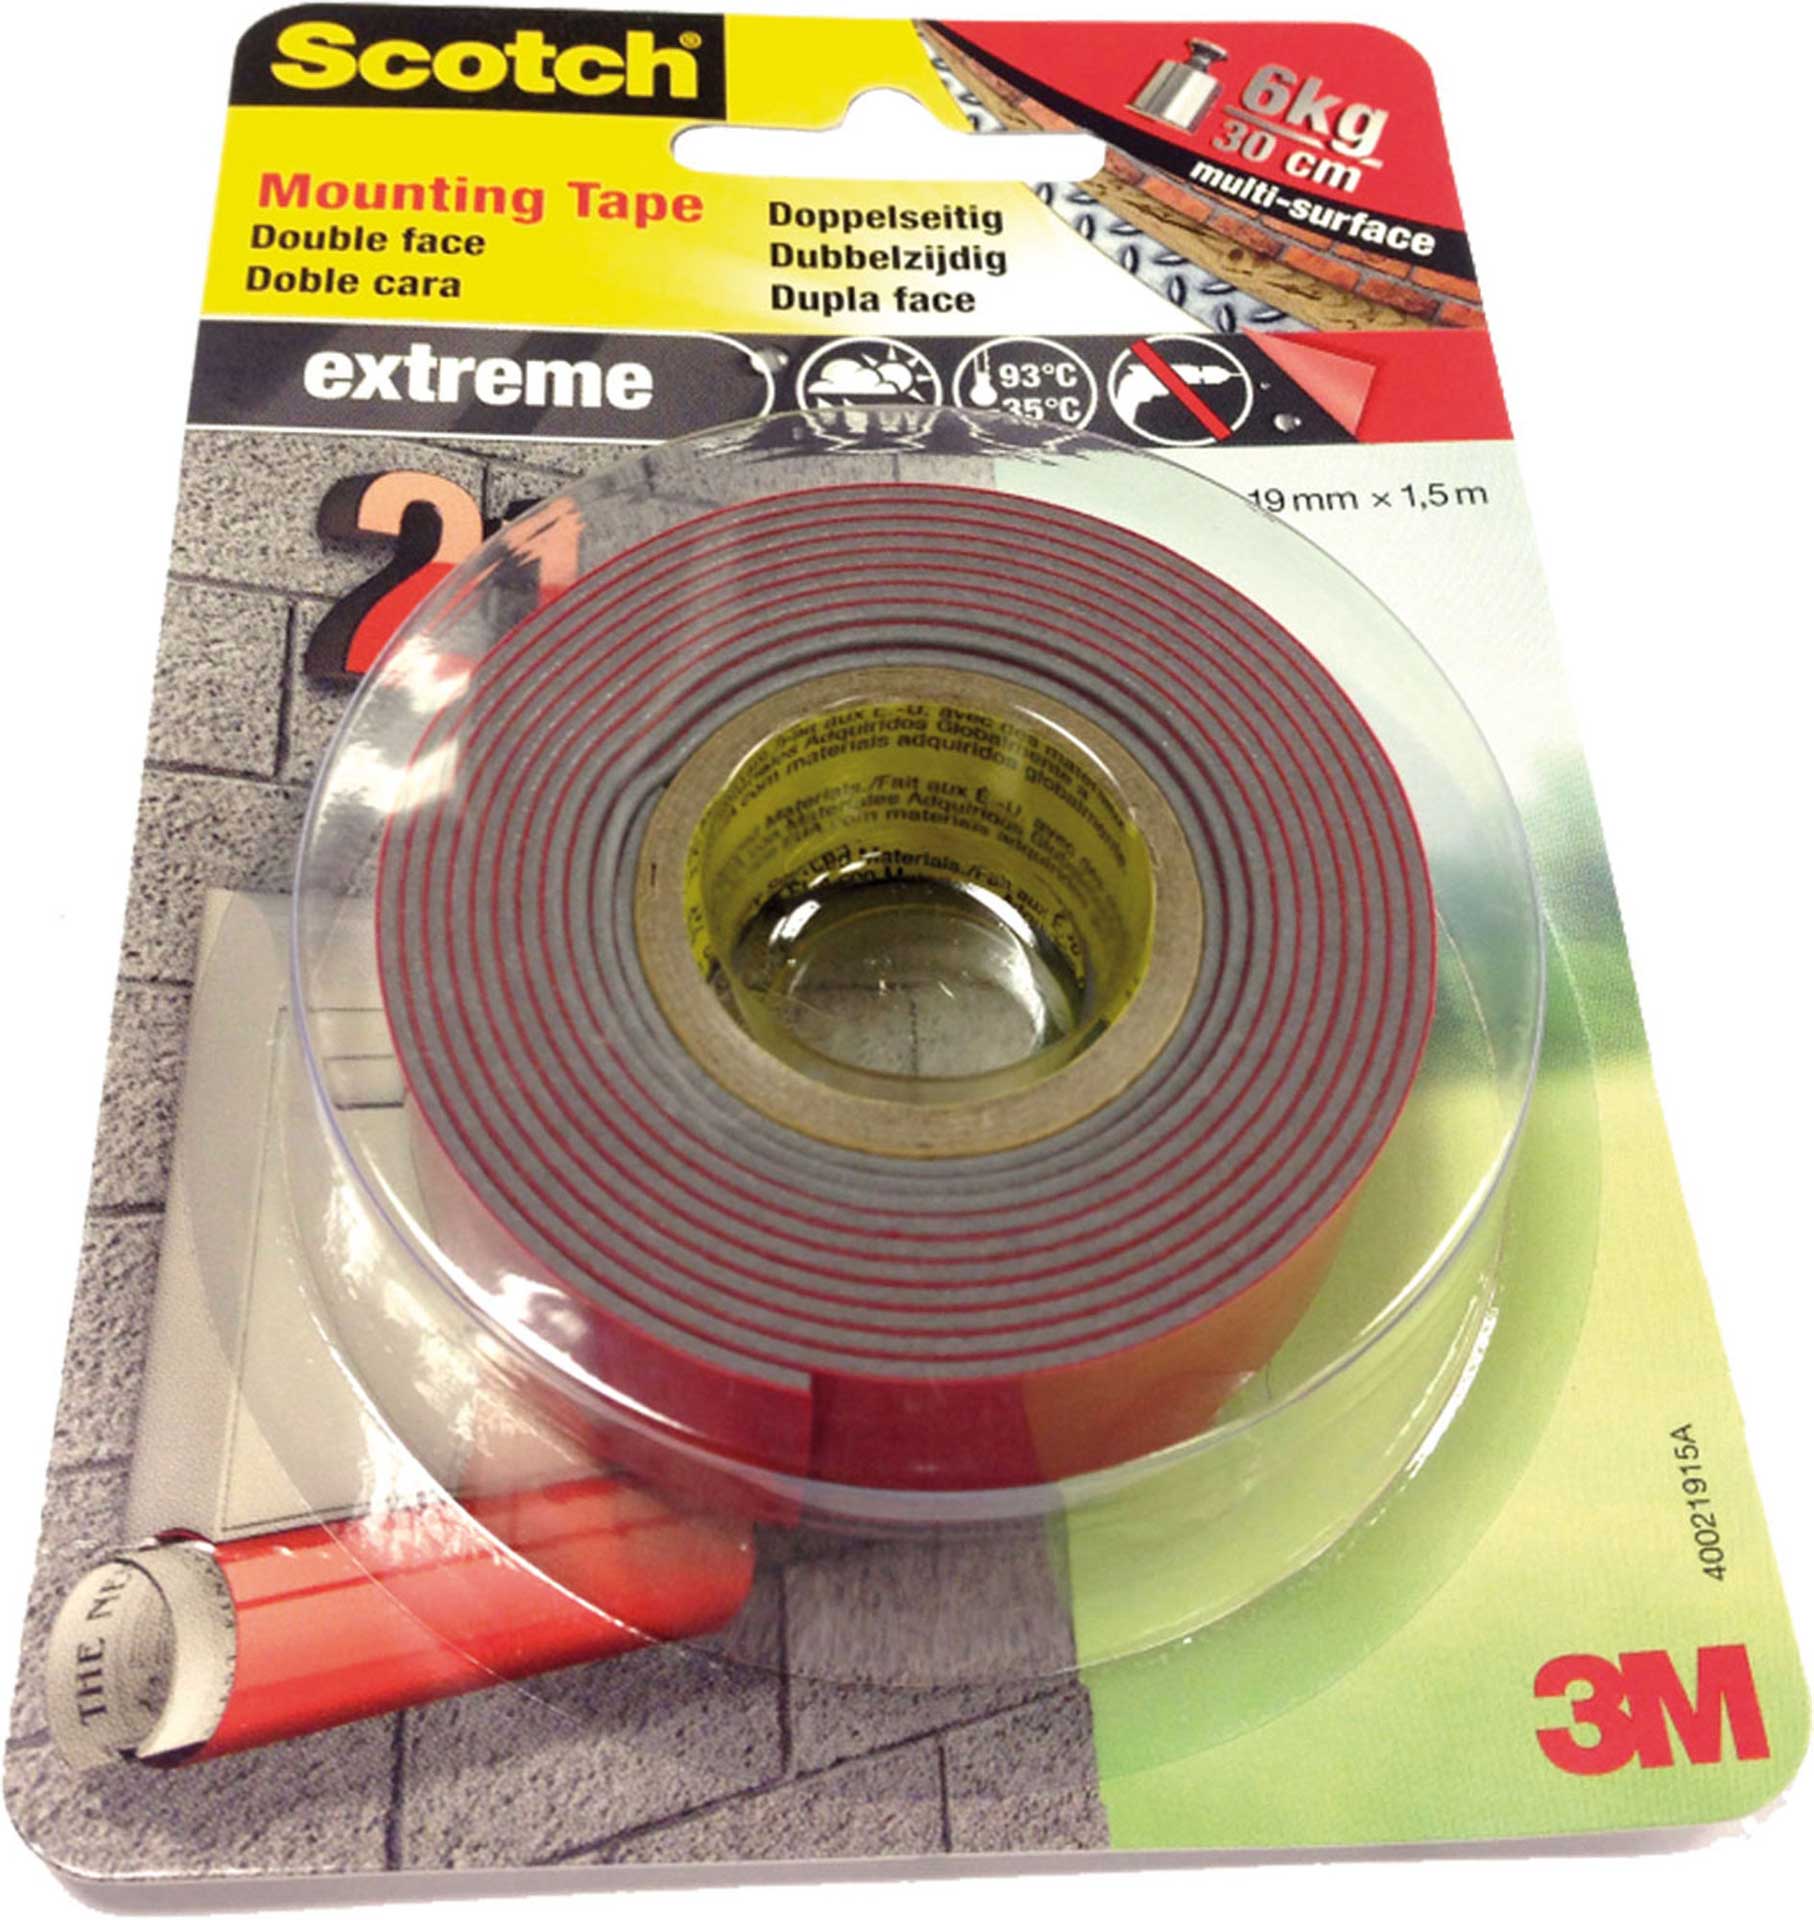 3M DOUBLE-SIDED TAPE EXTREME 19MM 1,5 METER SCOTCH